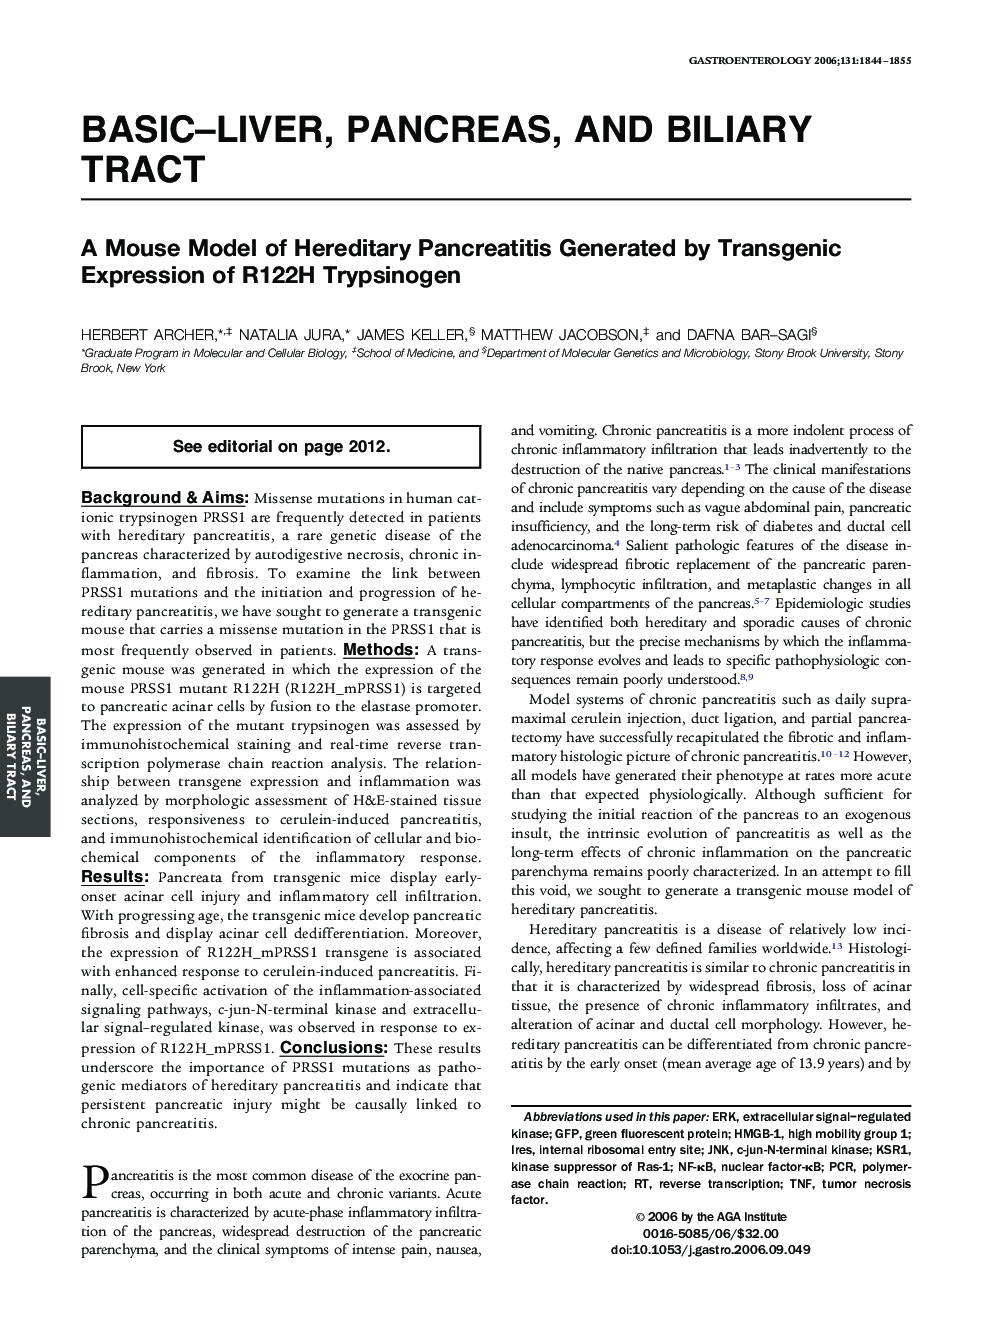 A Mouse Model of Hereditary Pancreatitis Generated by Transgenic Expression of R122H Trypsinogen 